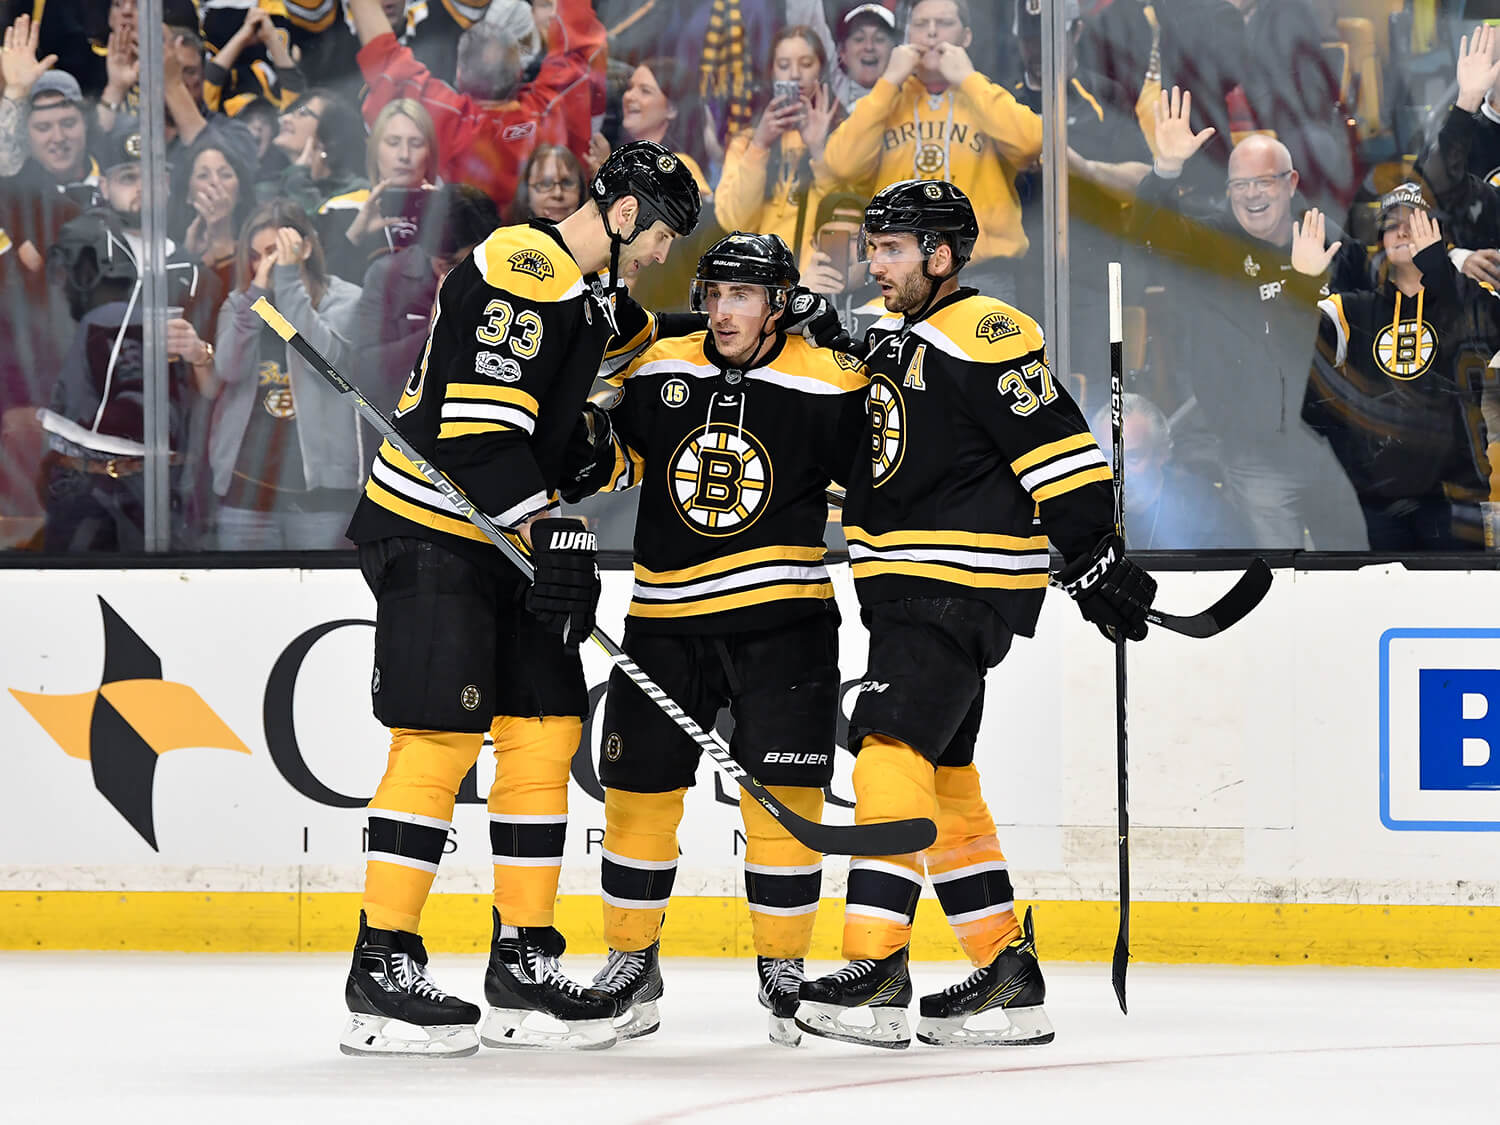 Despite Top Line’s Offense, Bruins Lose In Shoot Out